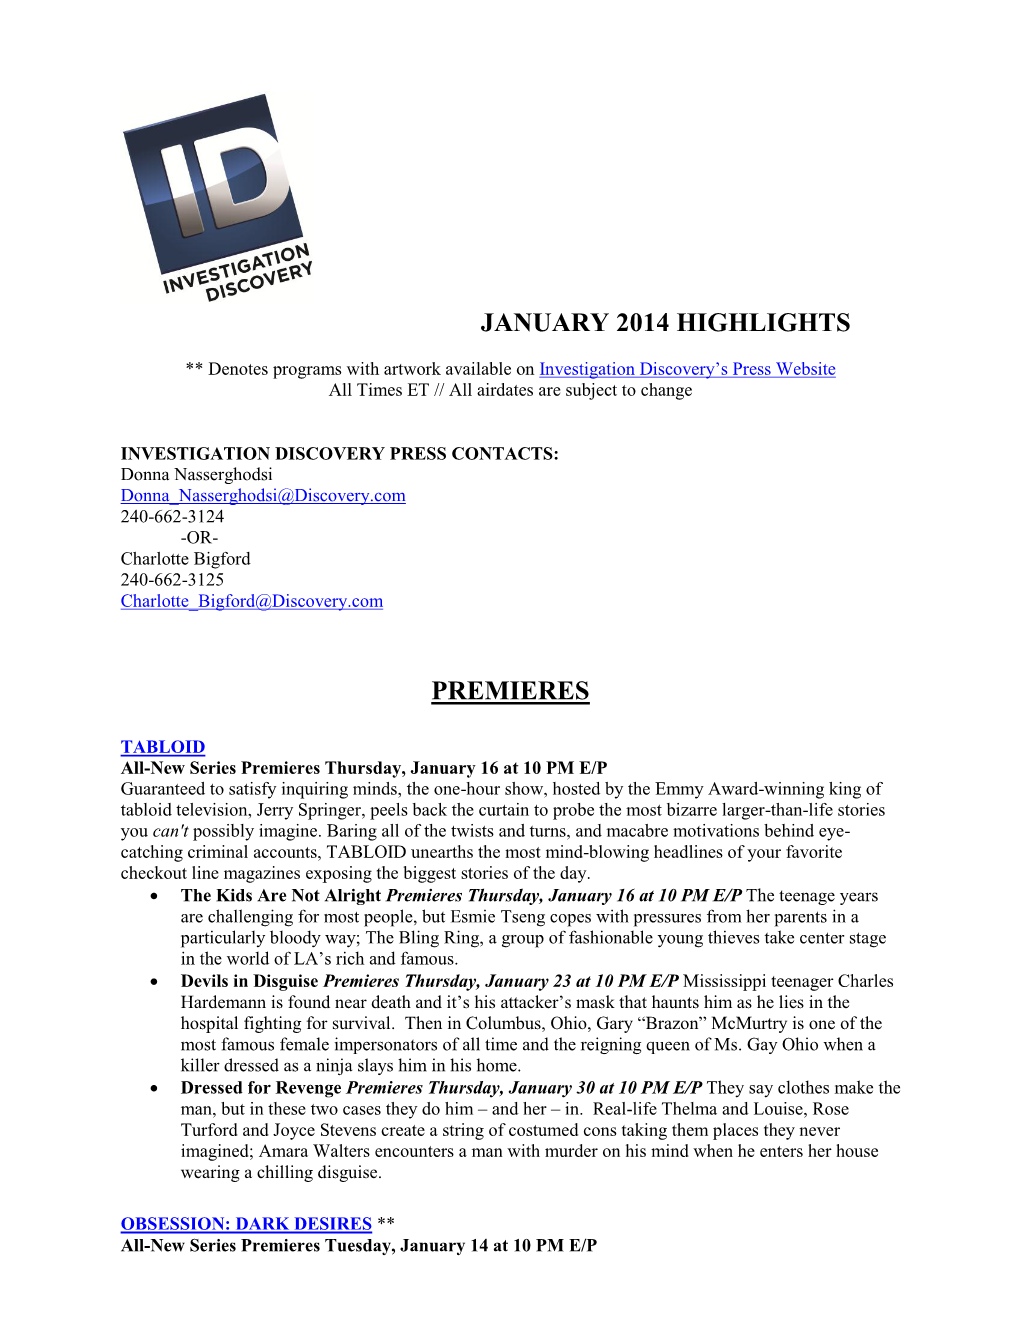 Investigation Discovery's January 2014 Programming Highlights